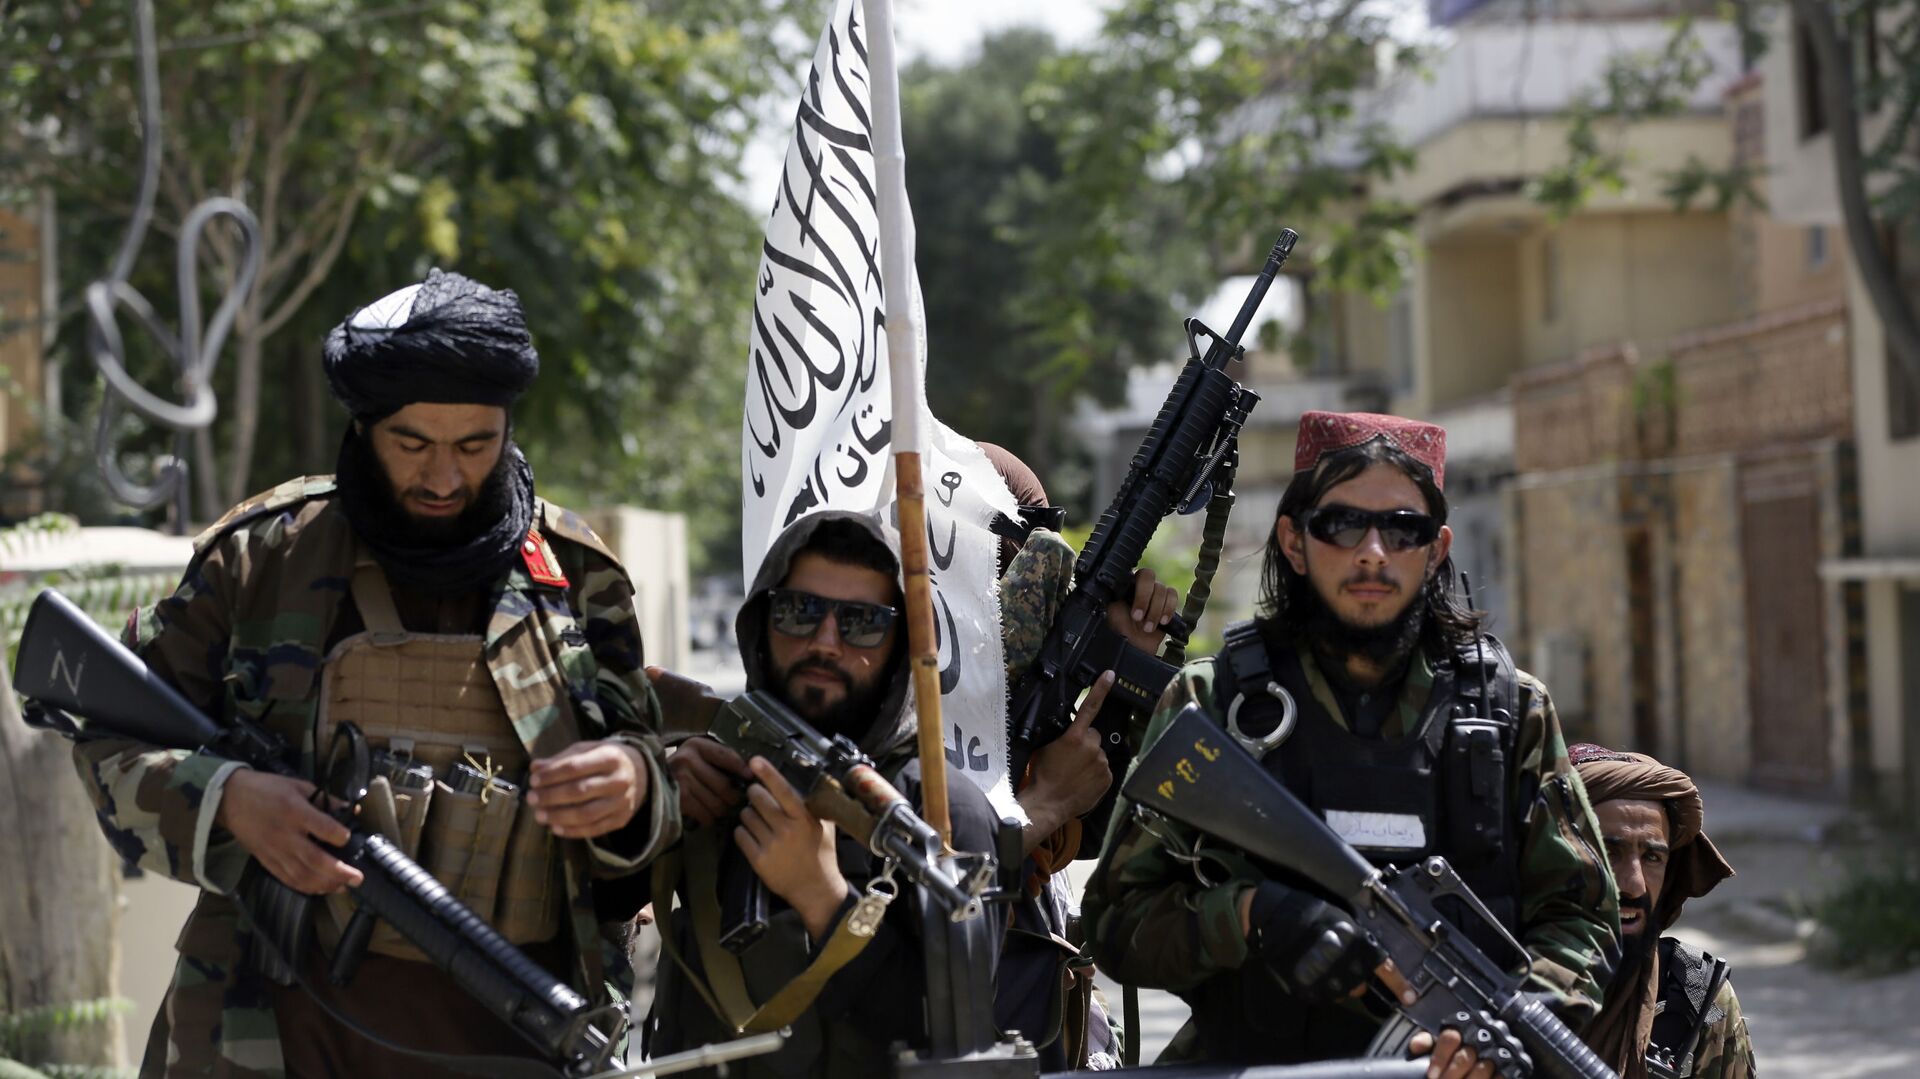 In this Aug. 19, 2021 file photo, Taliban fighters display their flag on patrol in Kabul, Afghanistan. When U.S. President Joe Biden took office early this year, Western allies were falling over themselves to welcome and praise him and hail a new era in trans-Atlantic cooperation. - Sputnik International, 1920, 25.08.2021